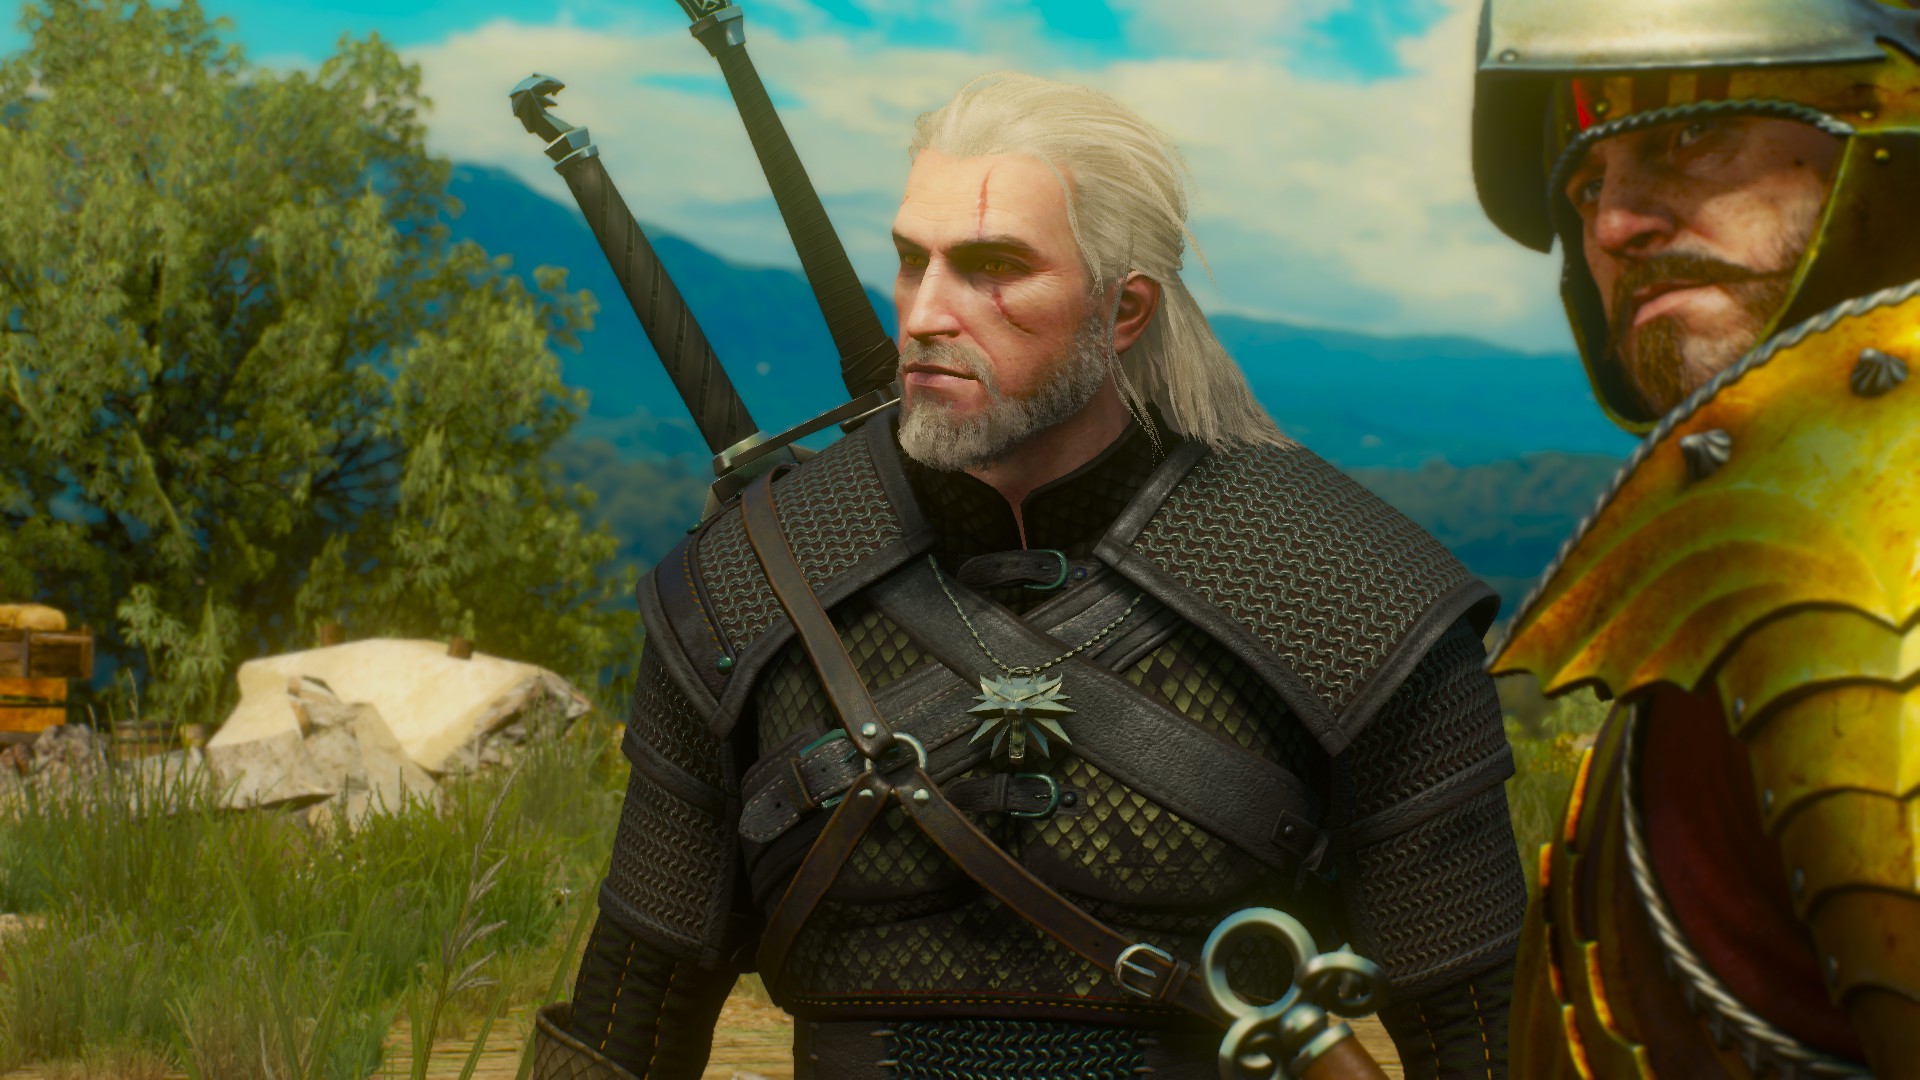 General 1920x1080 The Witcher 3: Wild Hunt The Witcher 3: Wild Hunt - Blood and Wine Geralt of Rivia CD Projekt RED video games video game characters